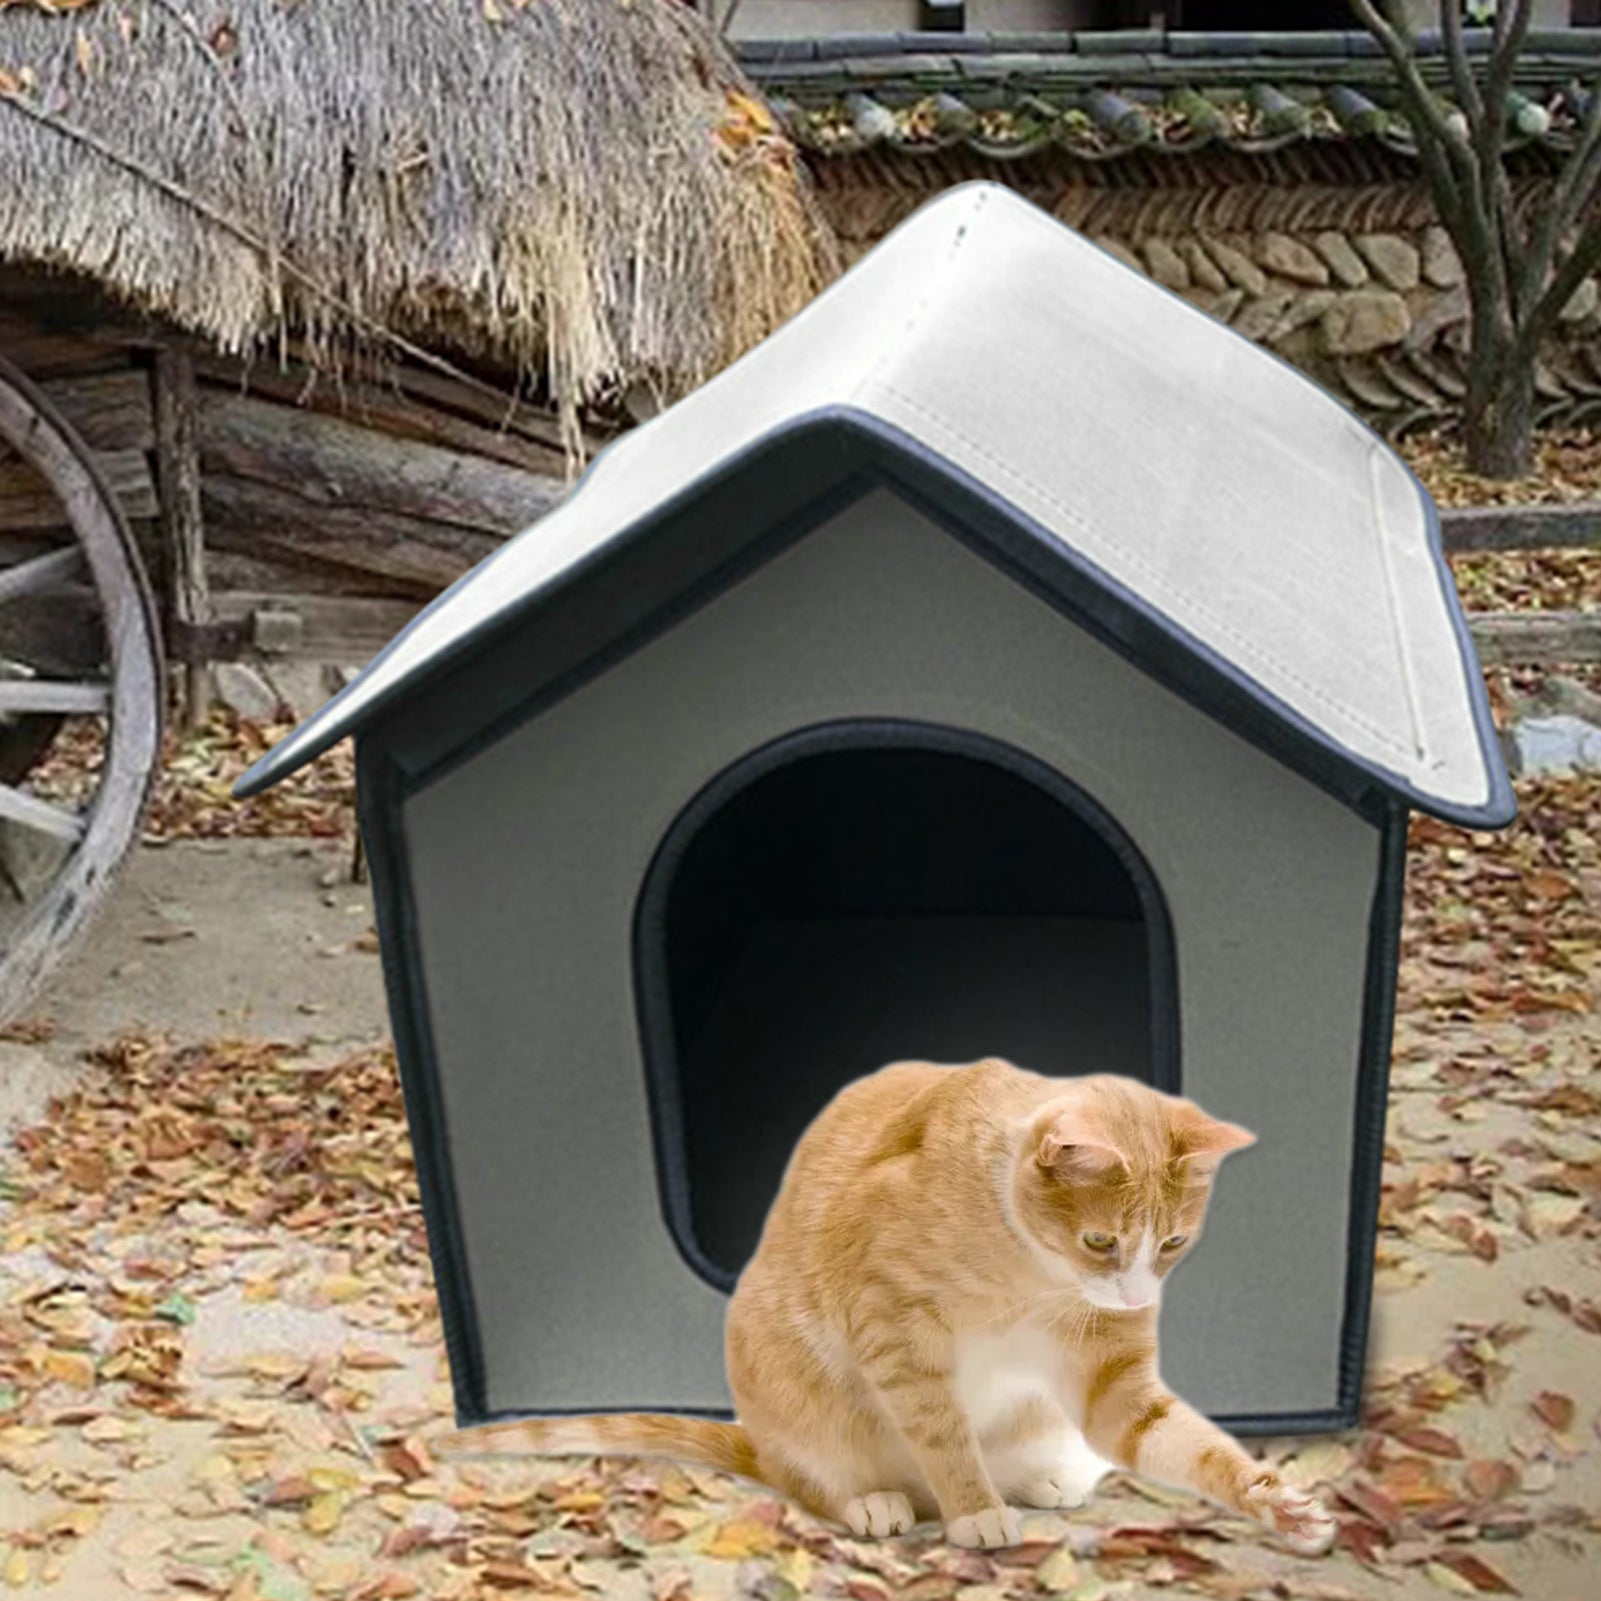 Lacyie Pet Outdoor House Waterproof Weatherproof Cat House Foldable Pet Shelter for Pets